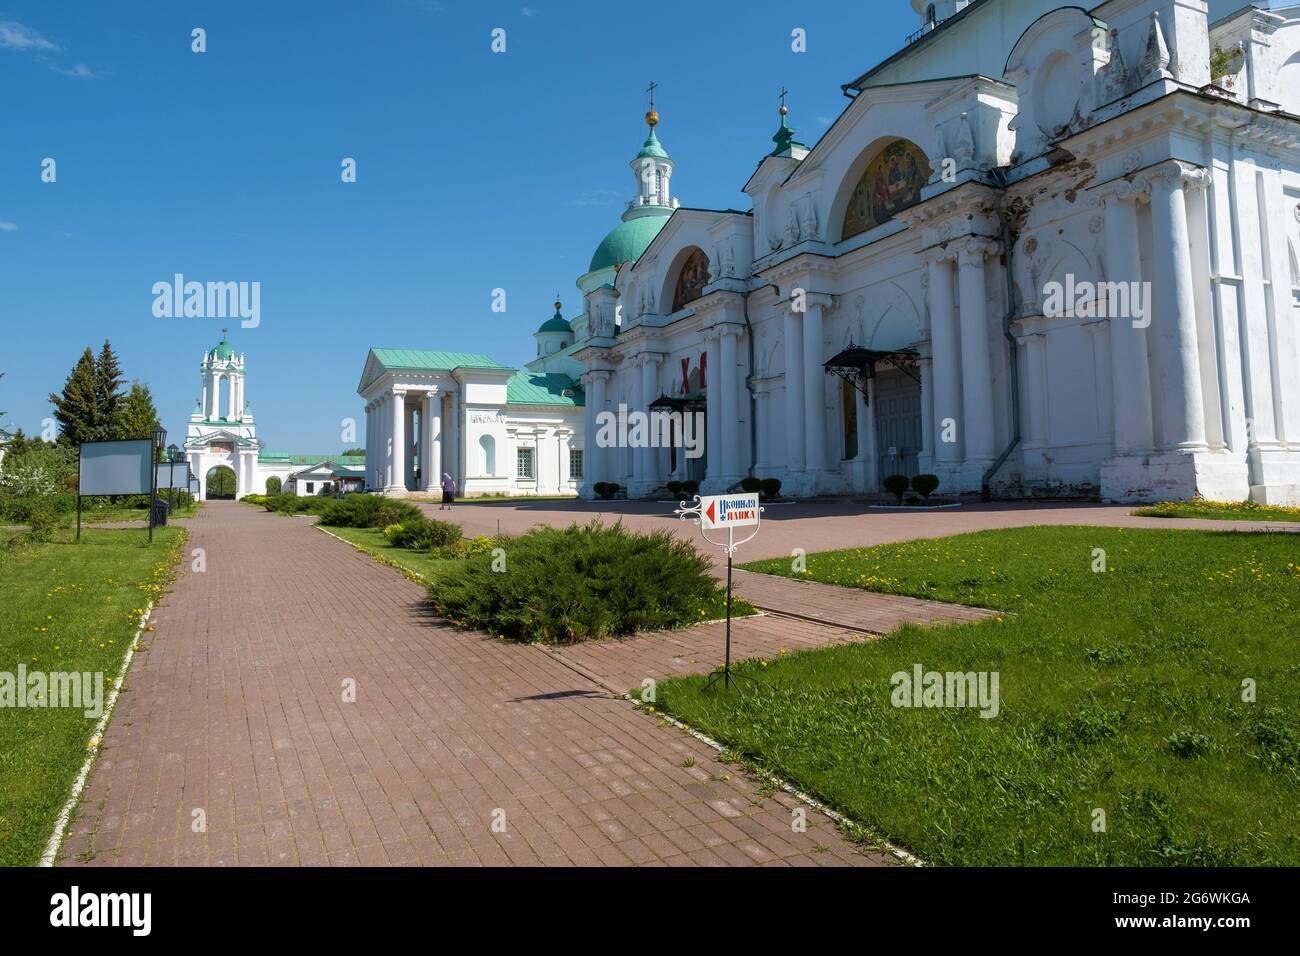 One of the corners in the Spaso-Yakovlevsky Monastery on a sunny summer day in the city of Rostov, Yaroslavl region, Russia. Stock Photo